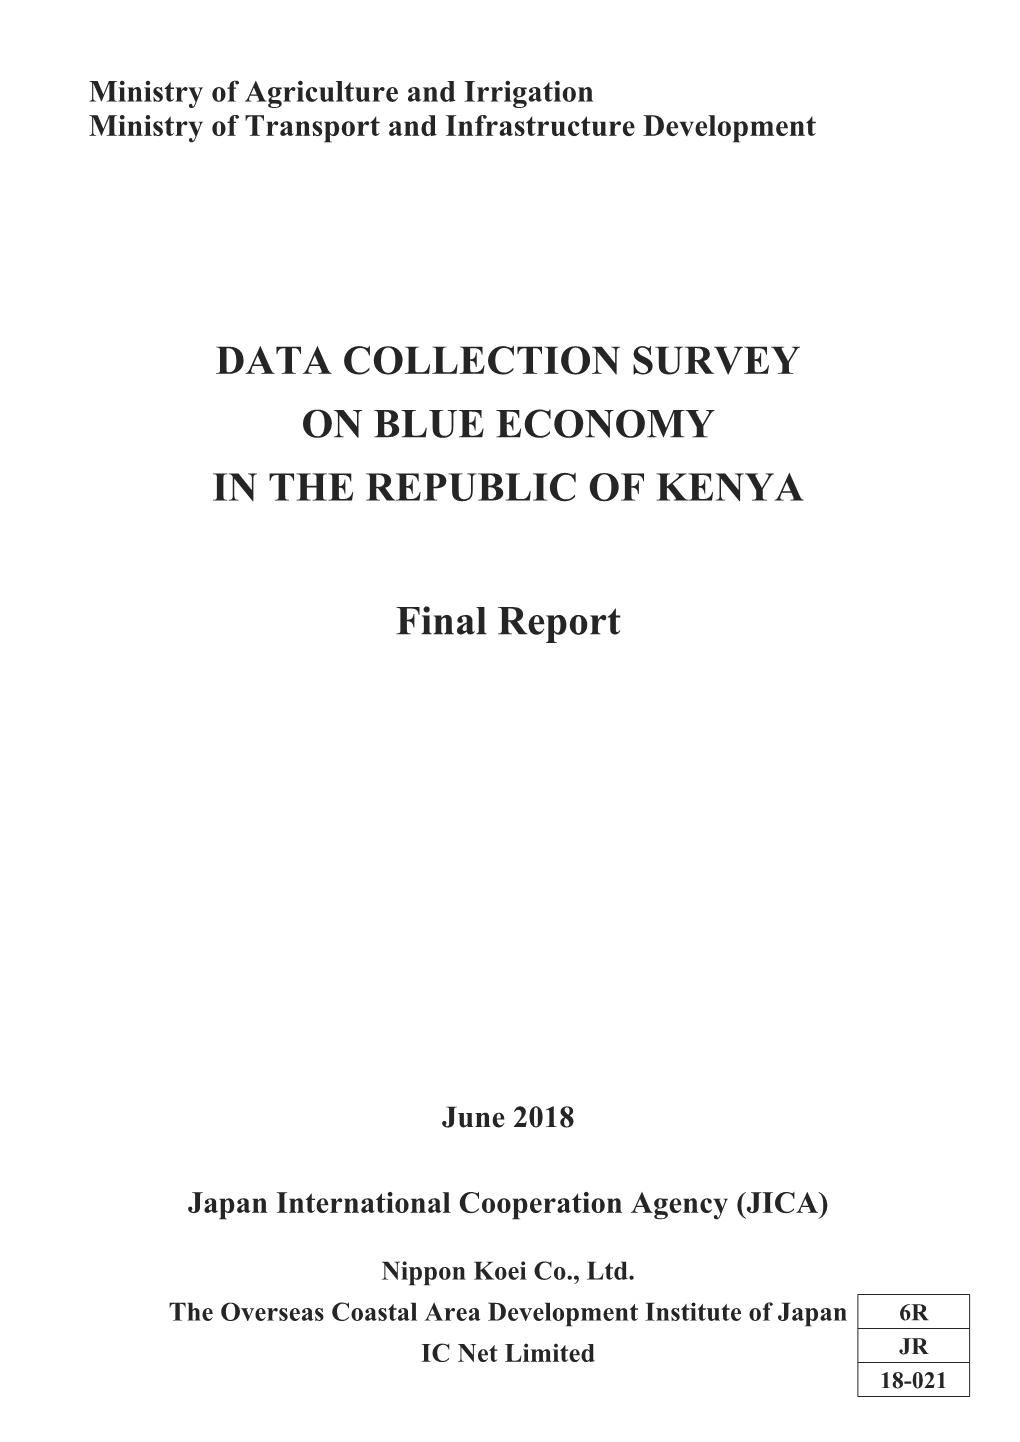 Data Collection Survey on Blue Economy in the Republic of Kenya